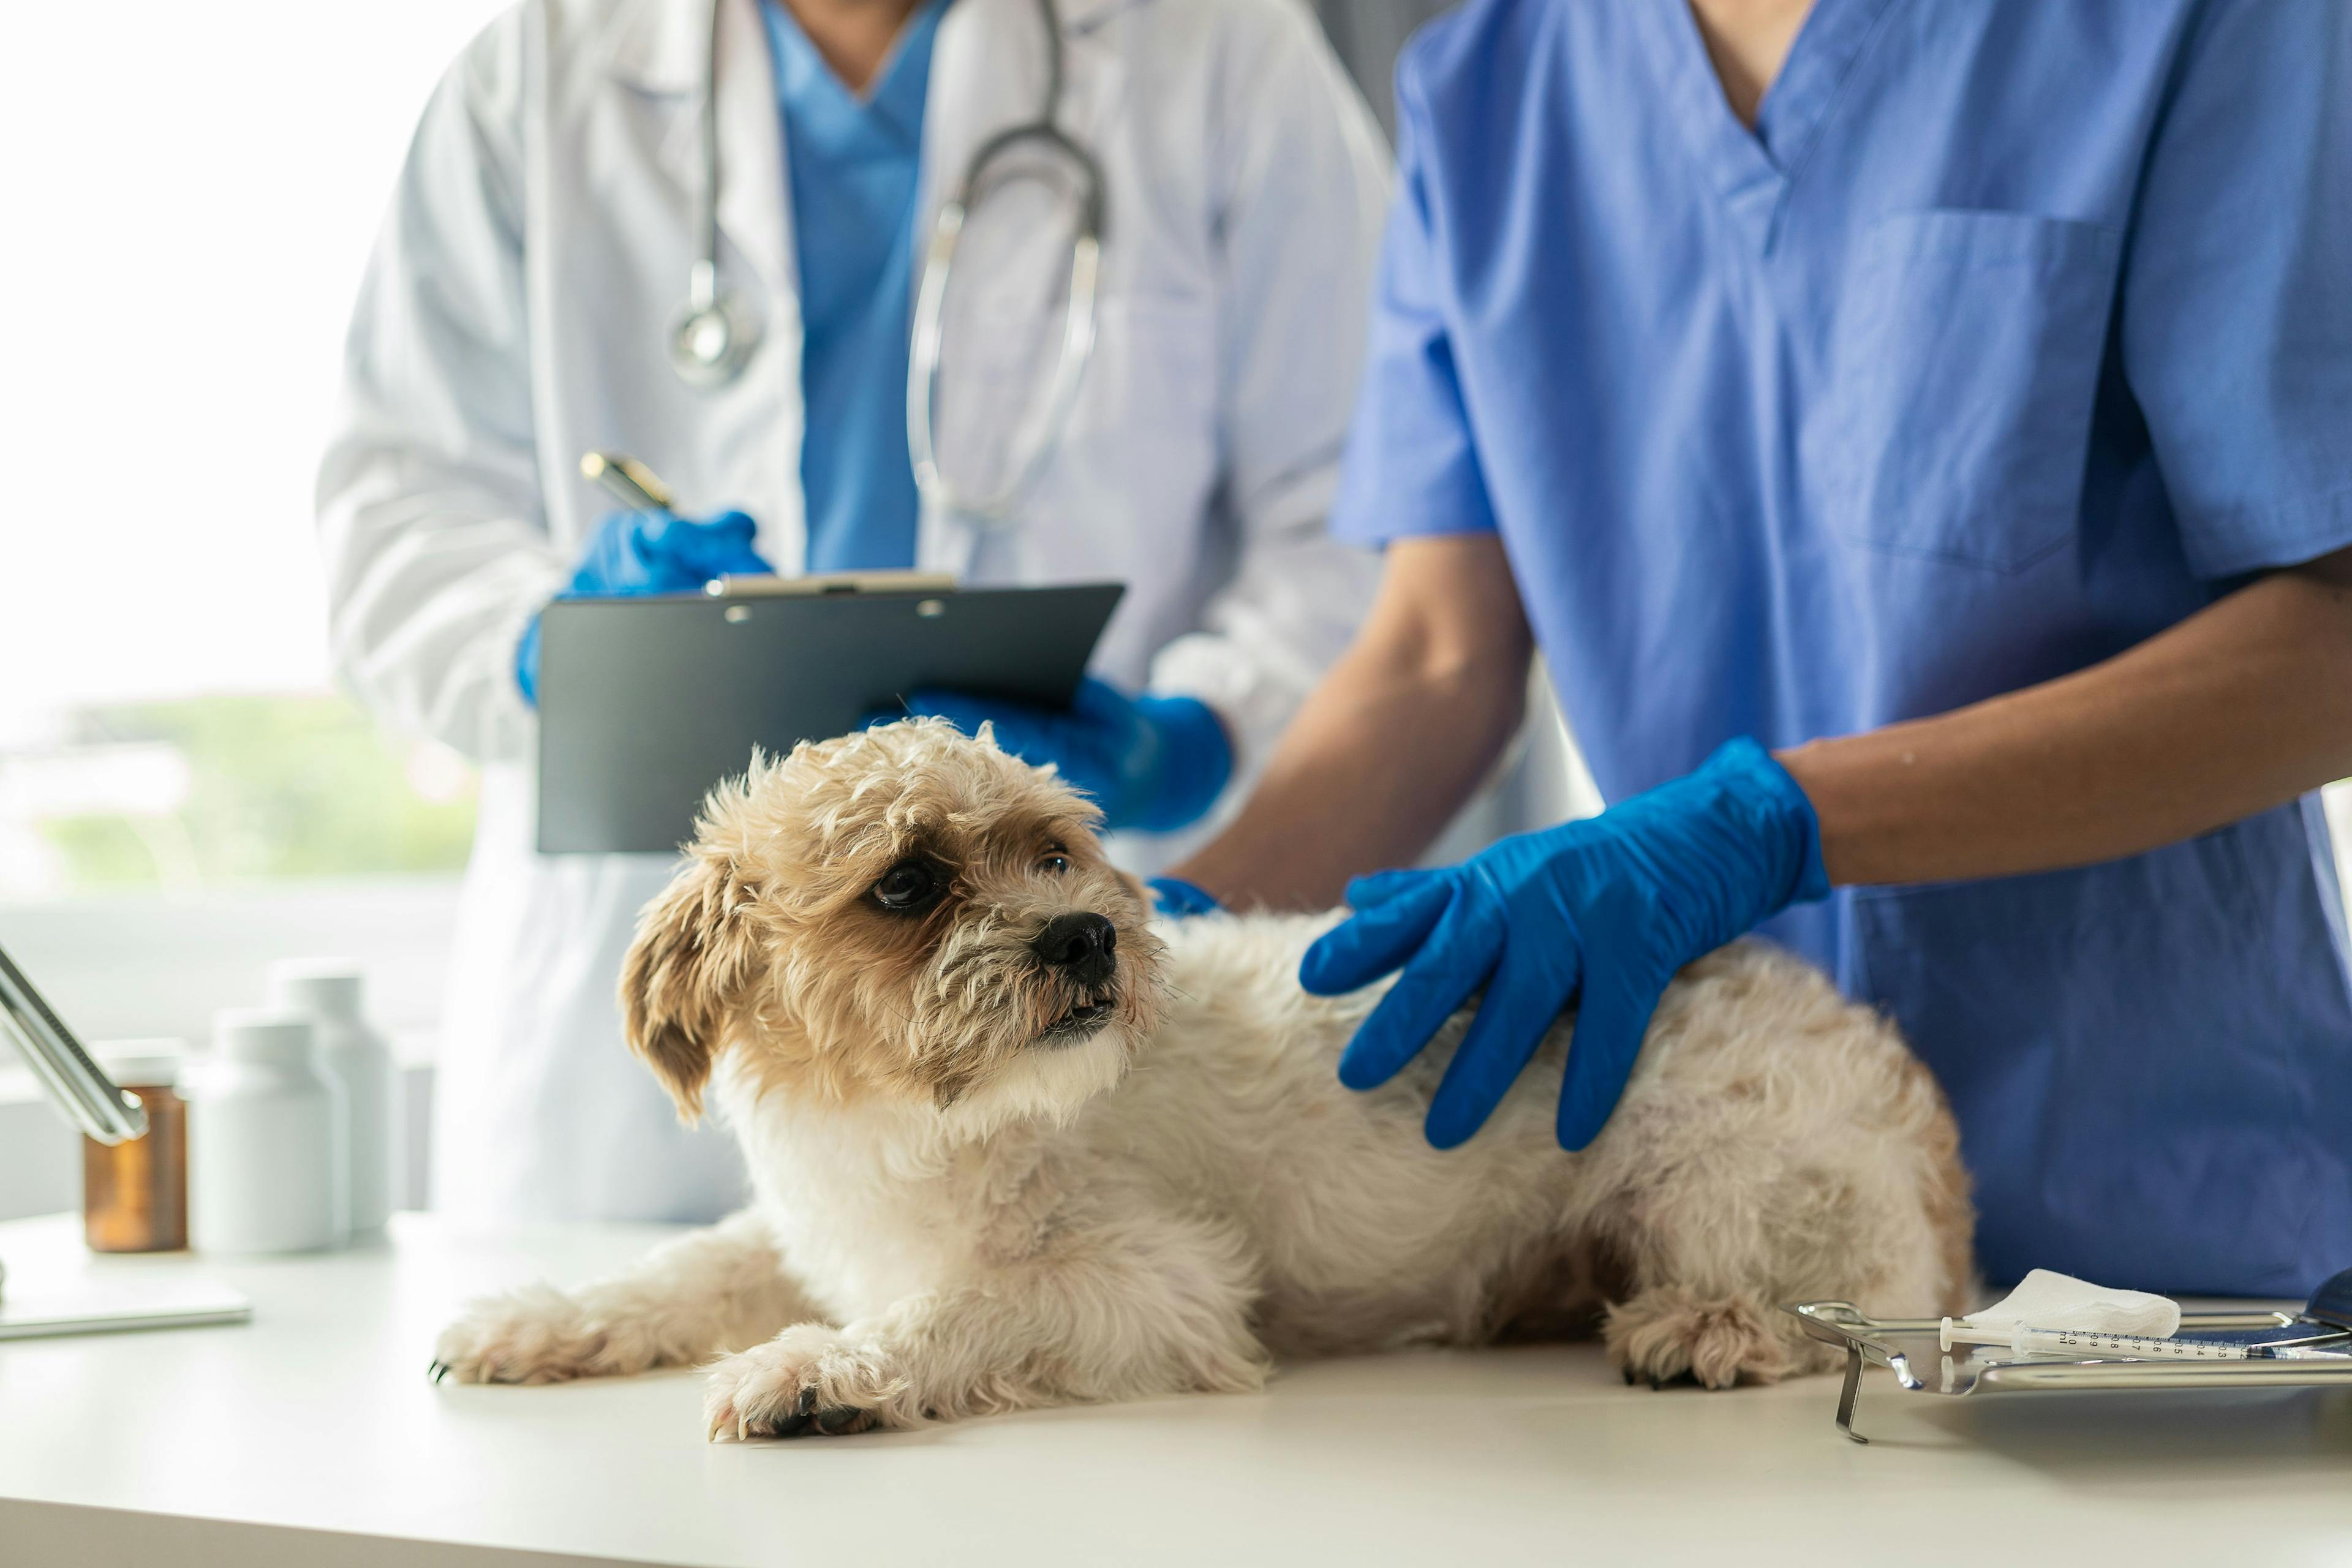 Liquid biopsy allows earlier detection of canine cancer